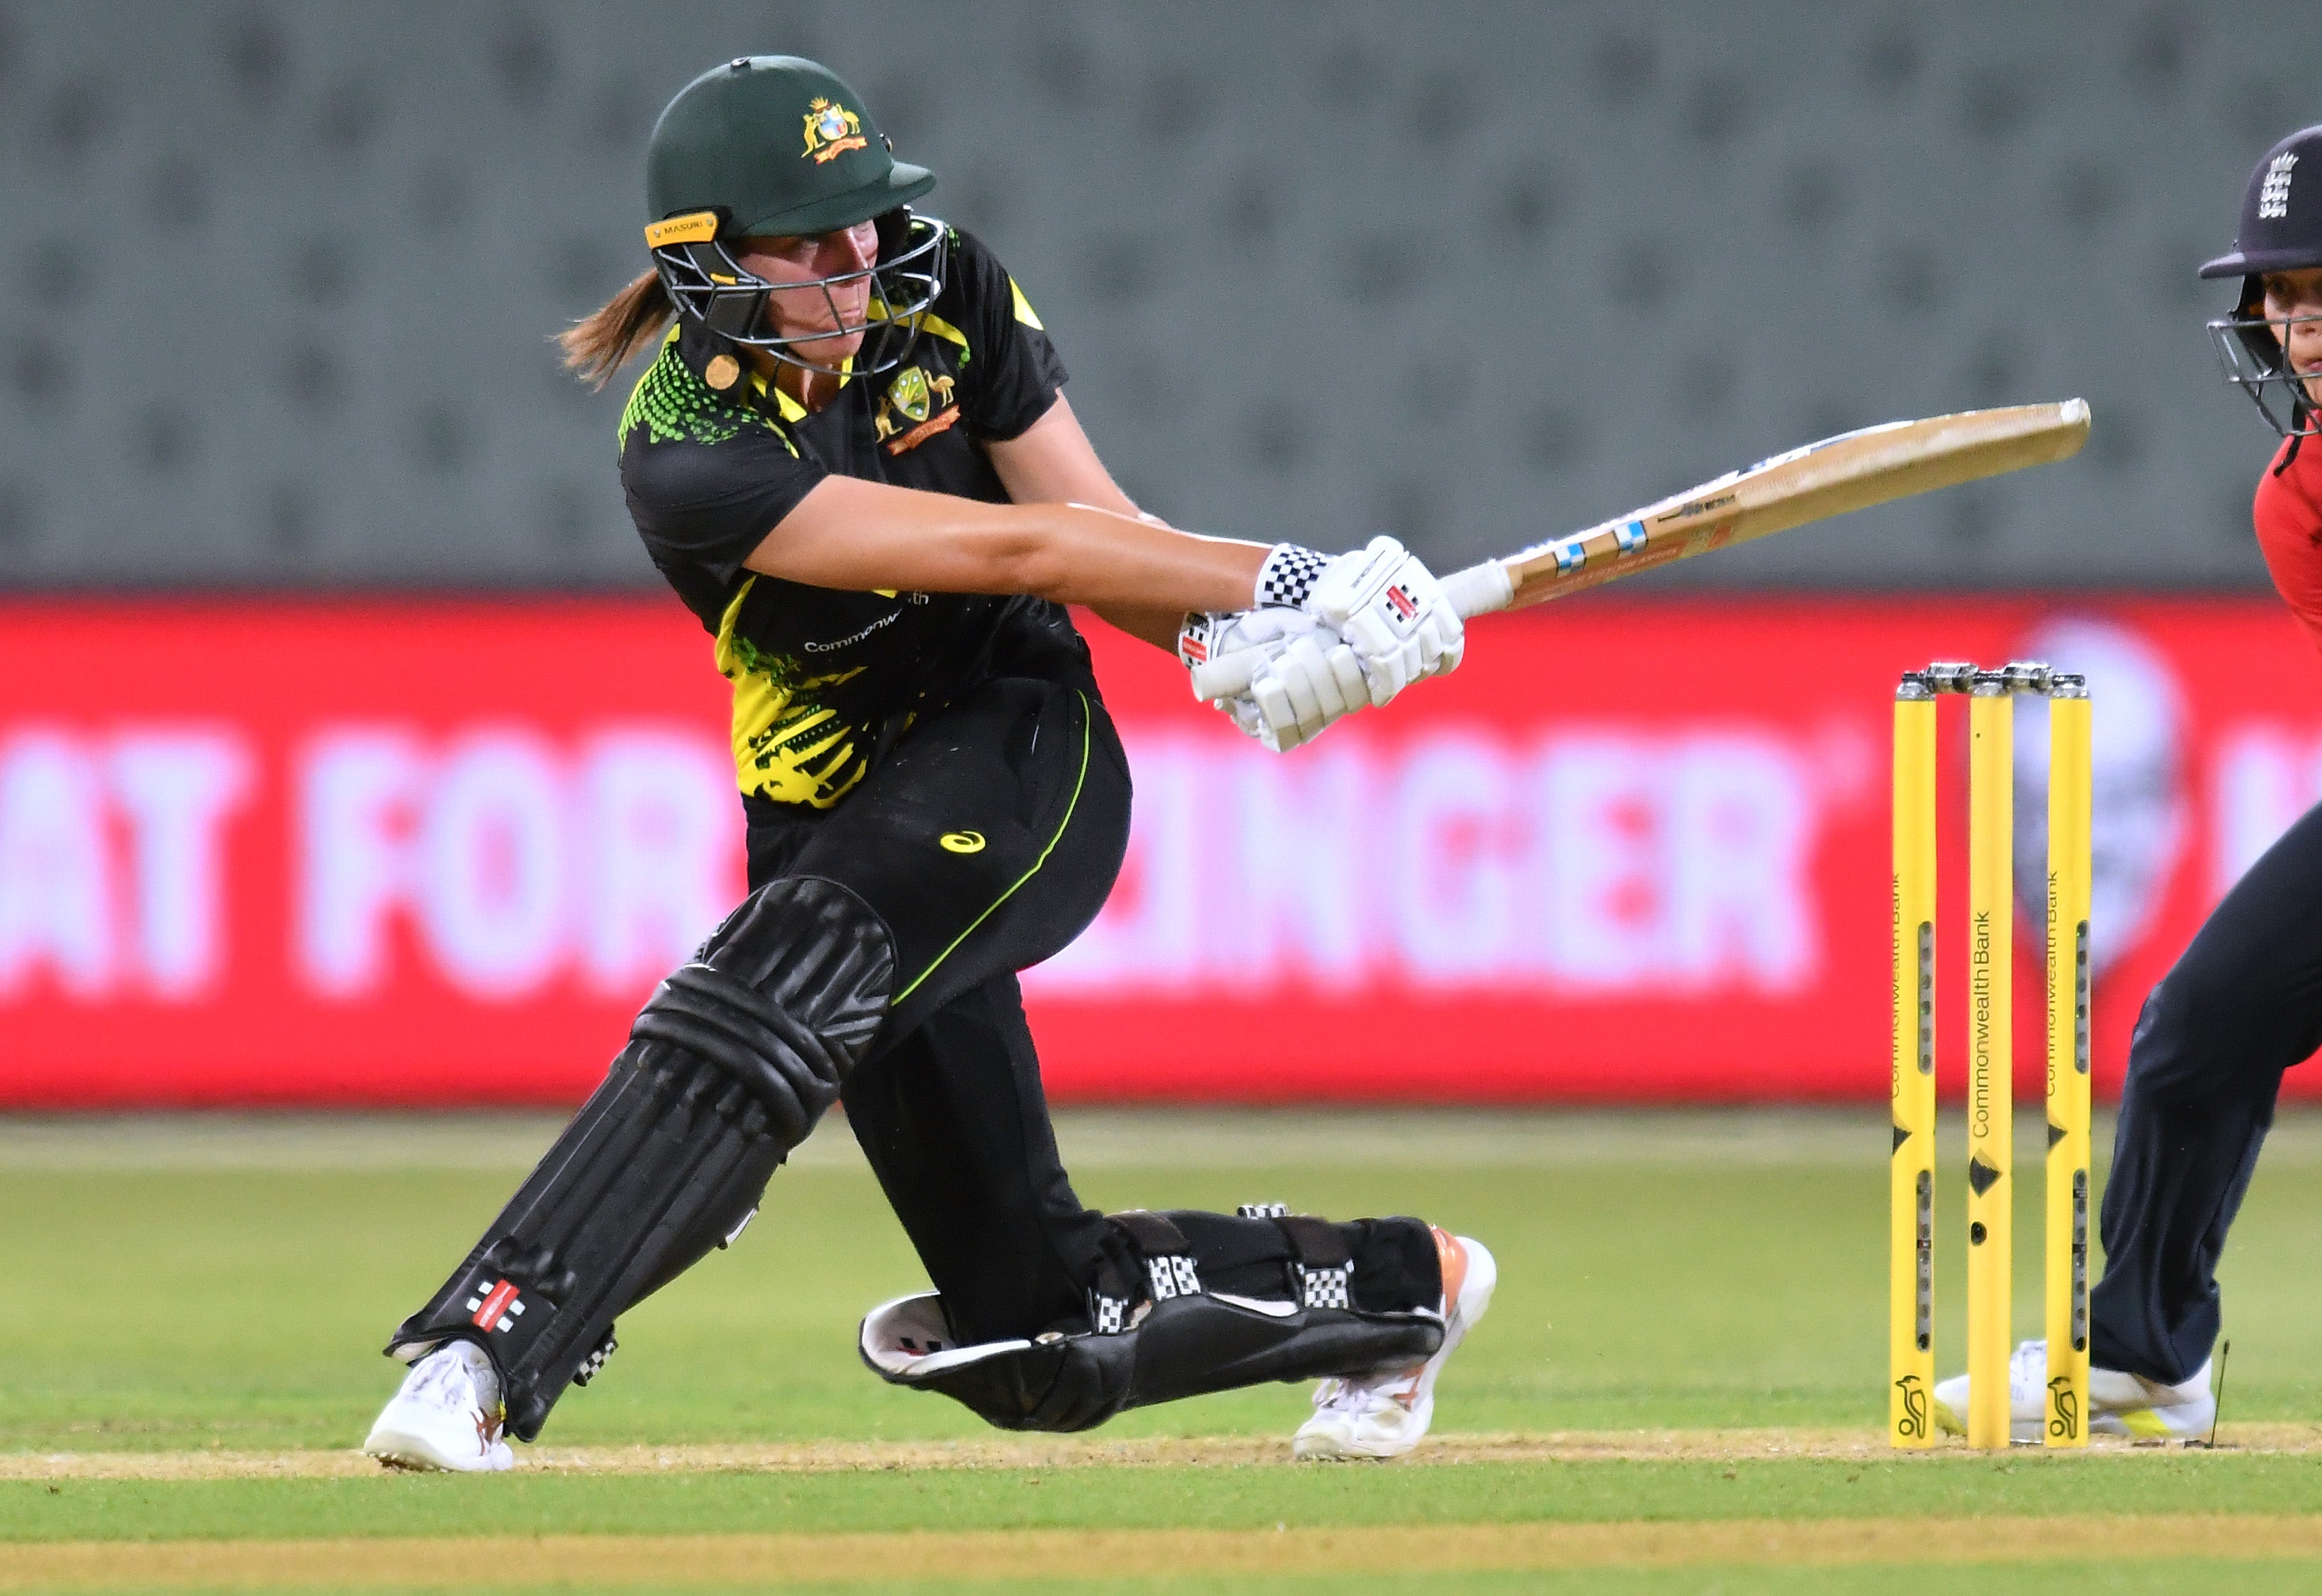 Australia drew first blood in the Women’s Ashes against England